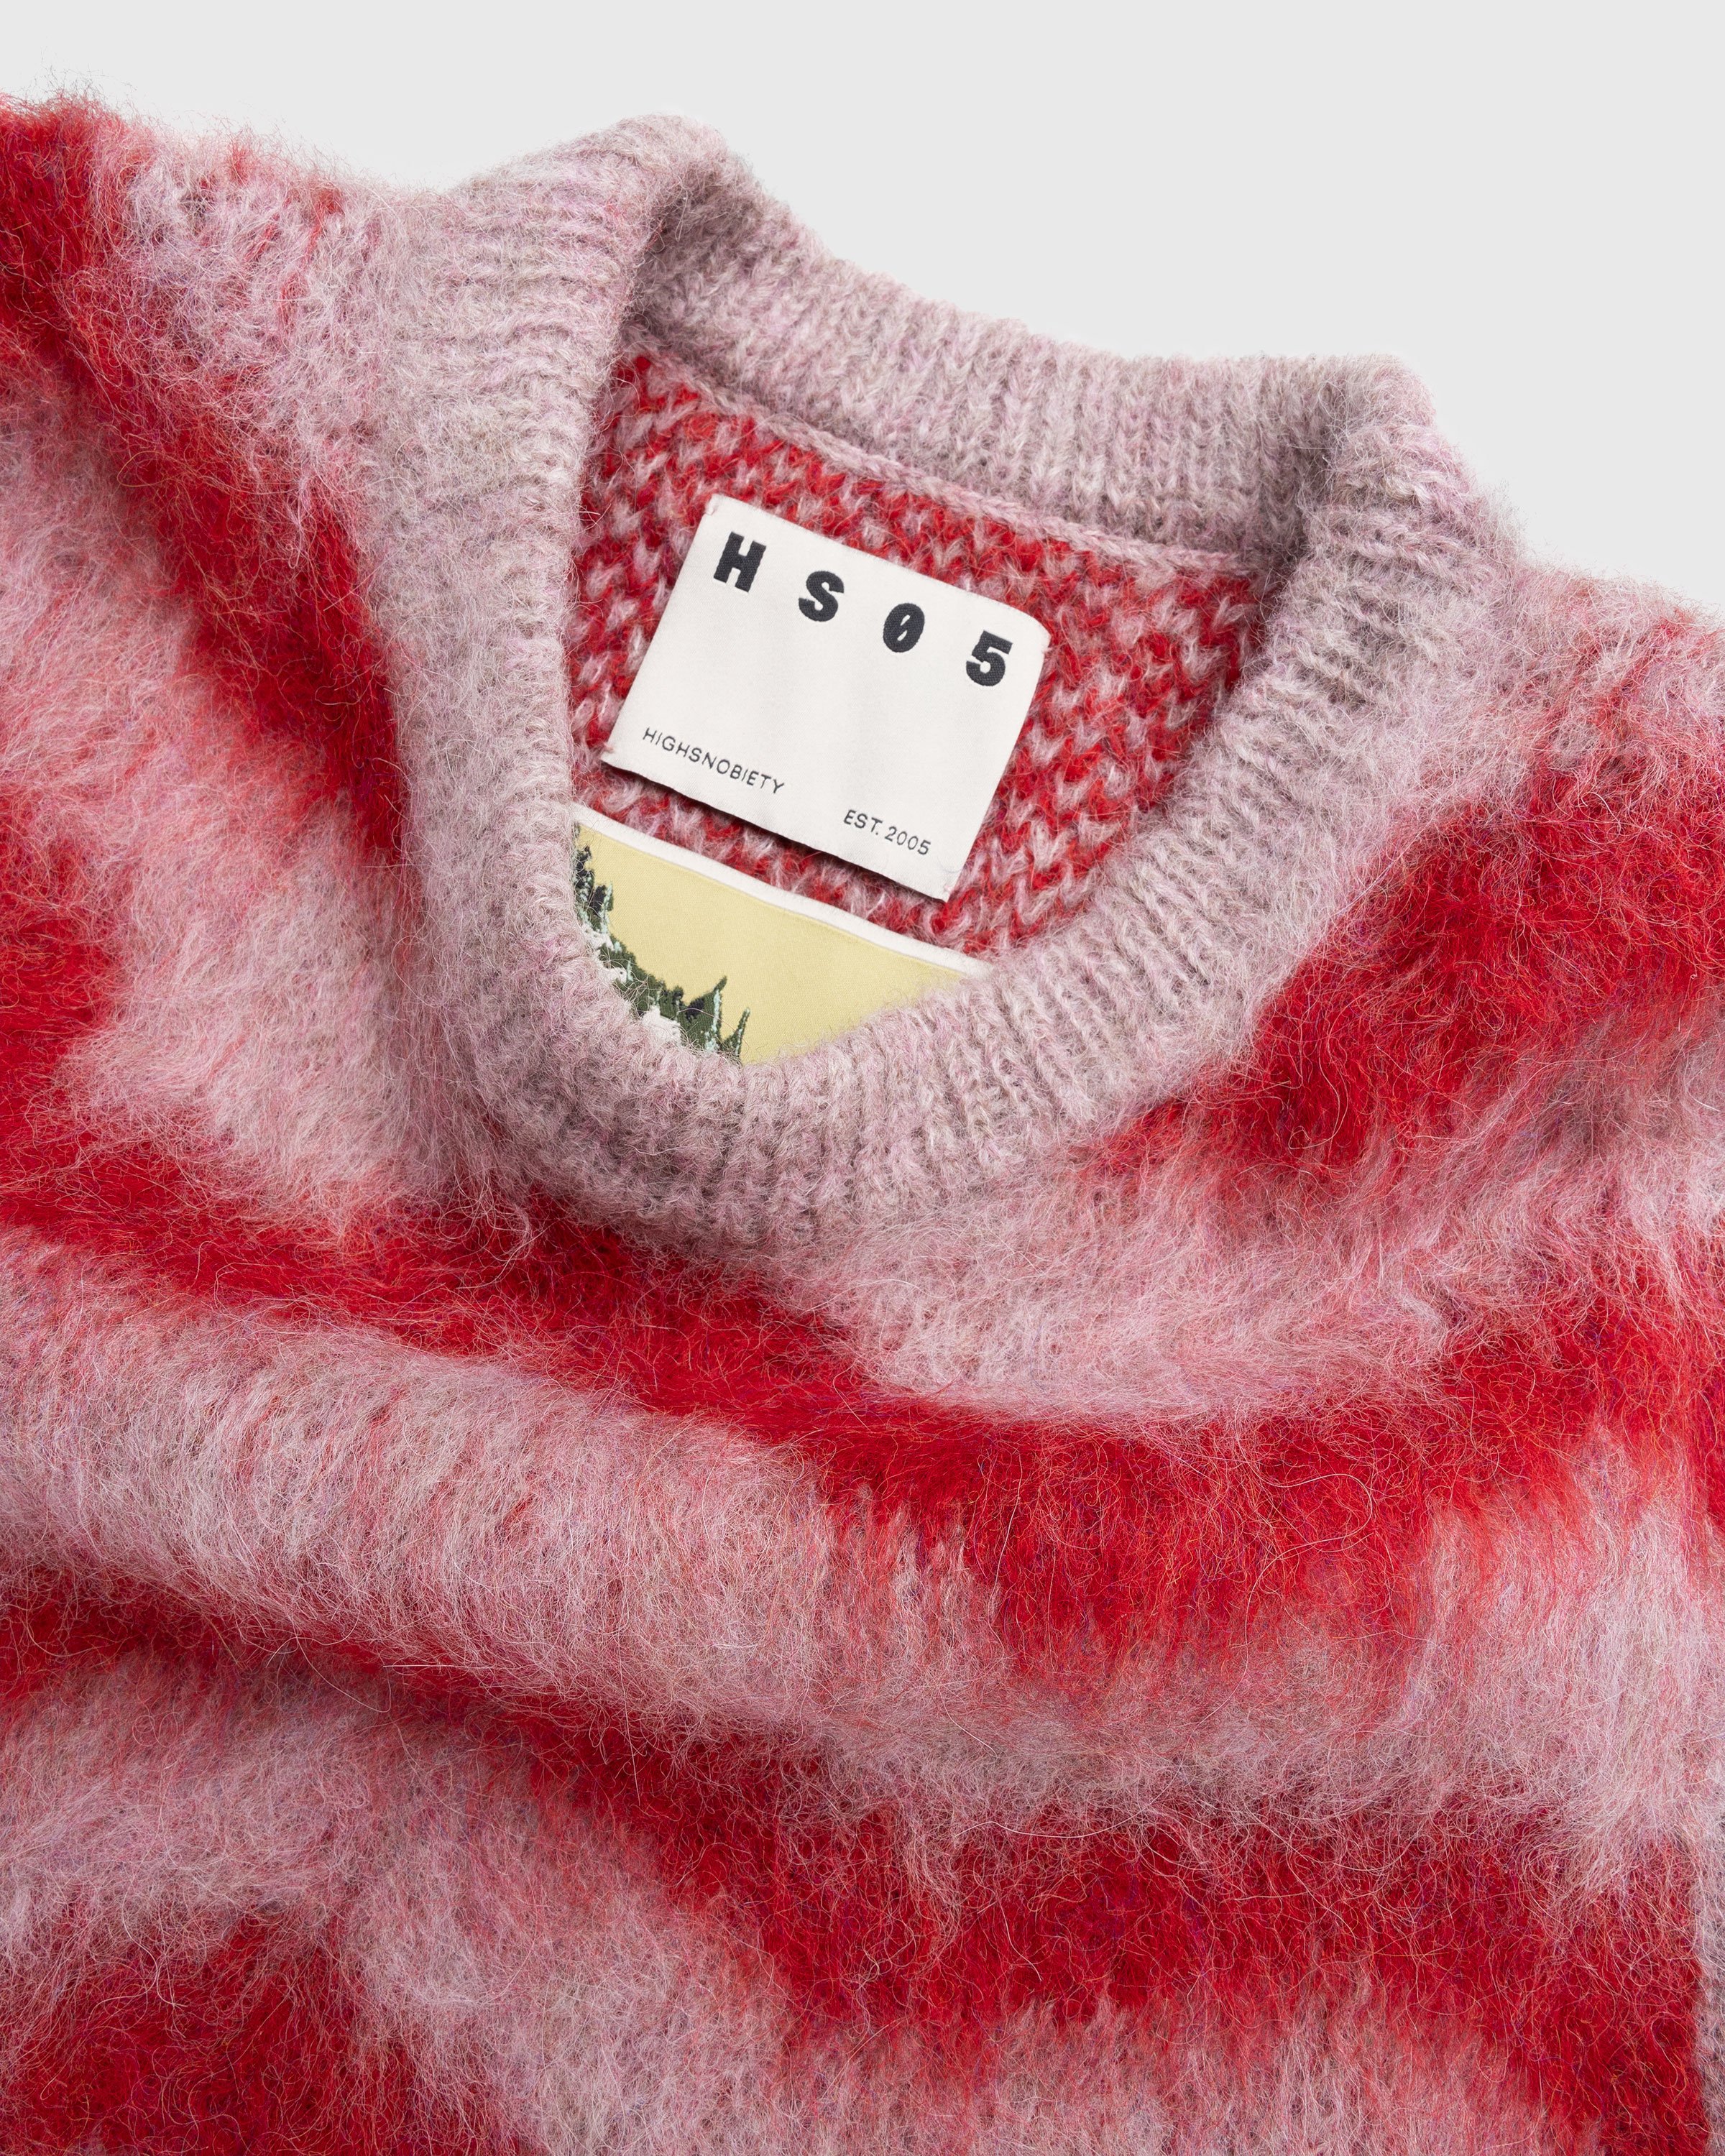 Highsnobiety HS05 - Alpaca Fuzzy Wave Sweater Vest Pale Rose/Red - Clothing - Multi - Image 6